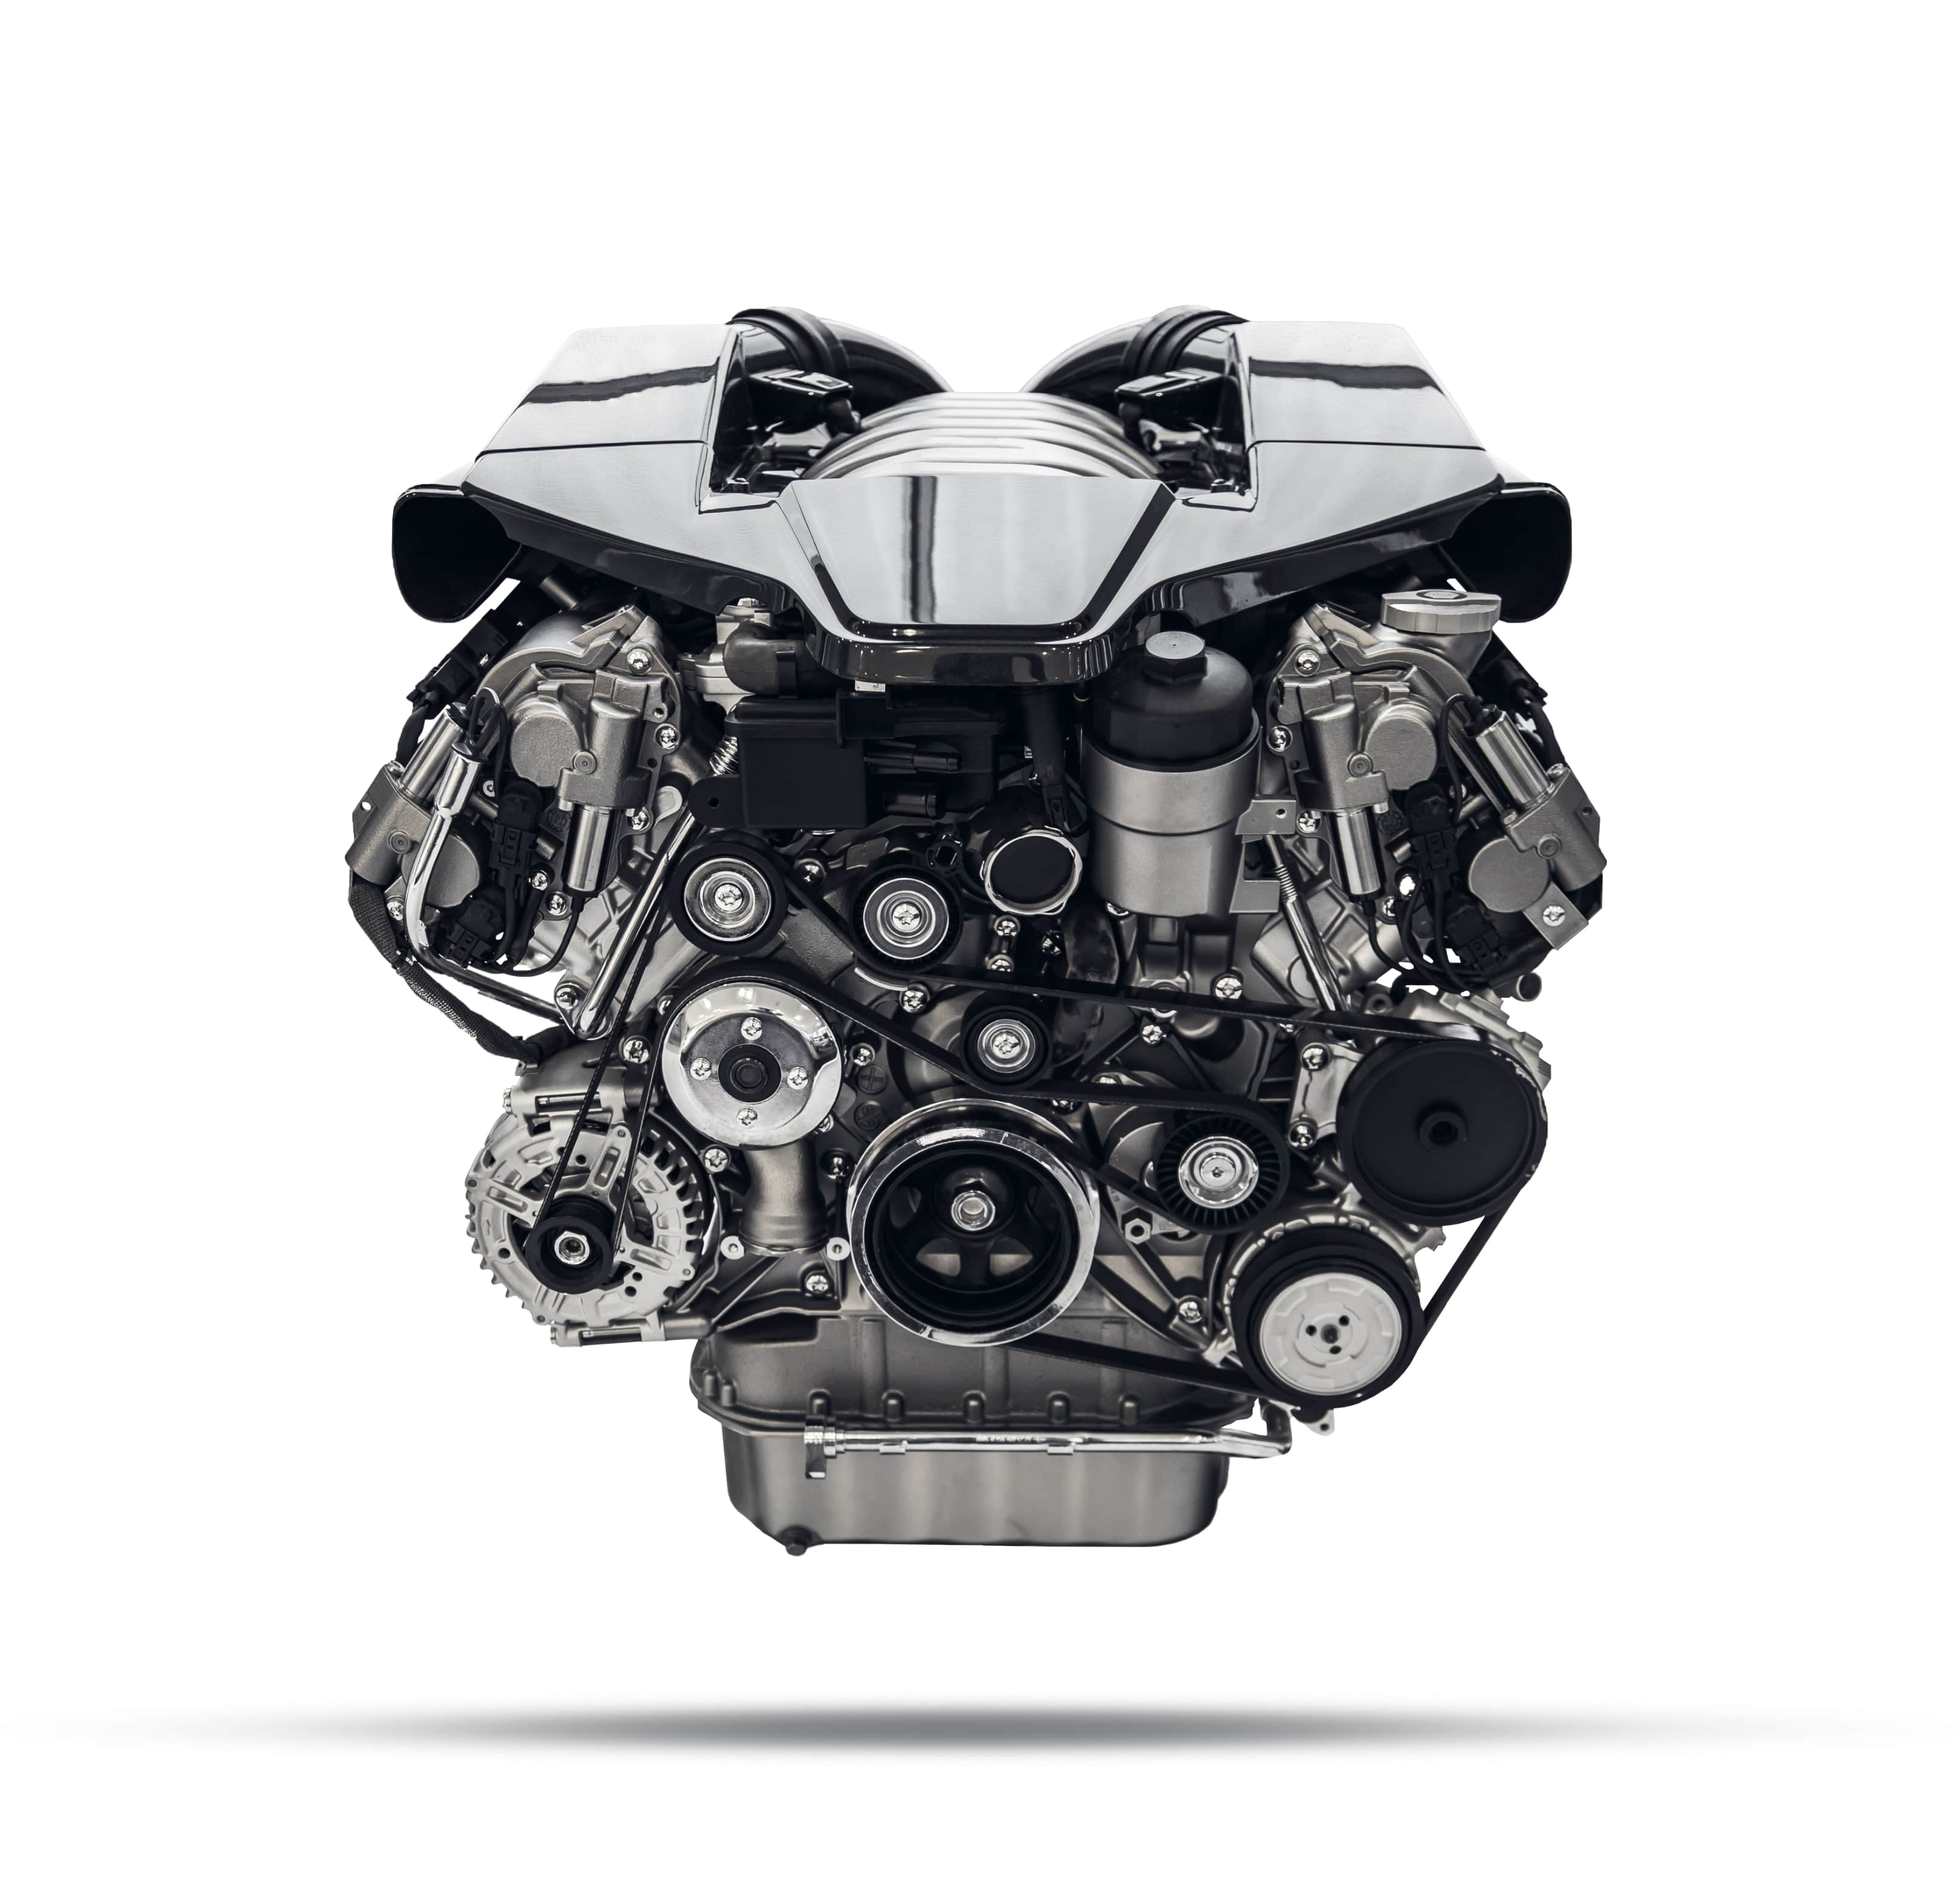 What are Common Engine Replacement Components and Focus Areas in an Engine Rebuild?